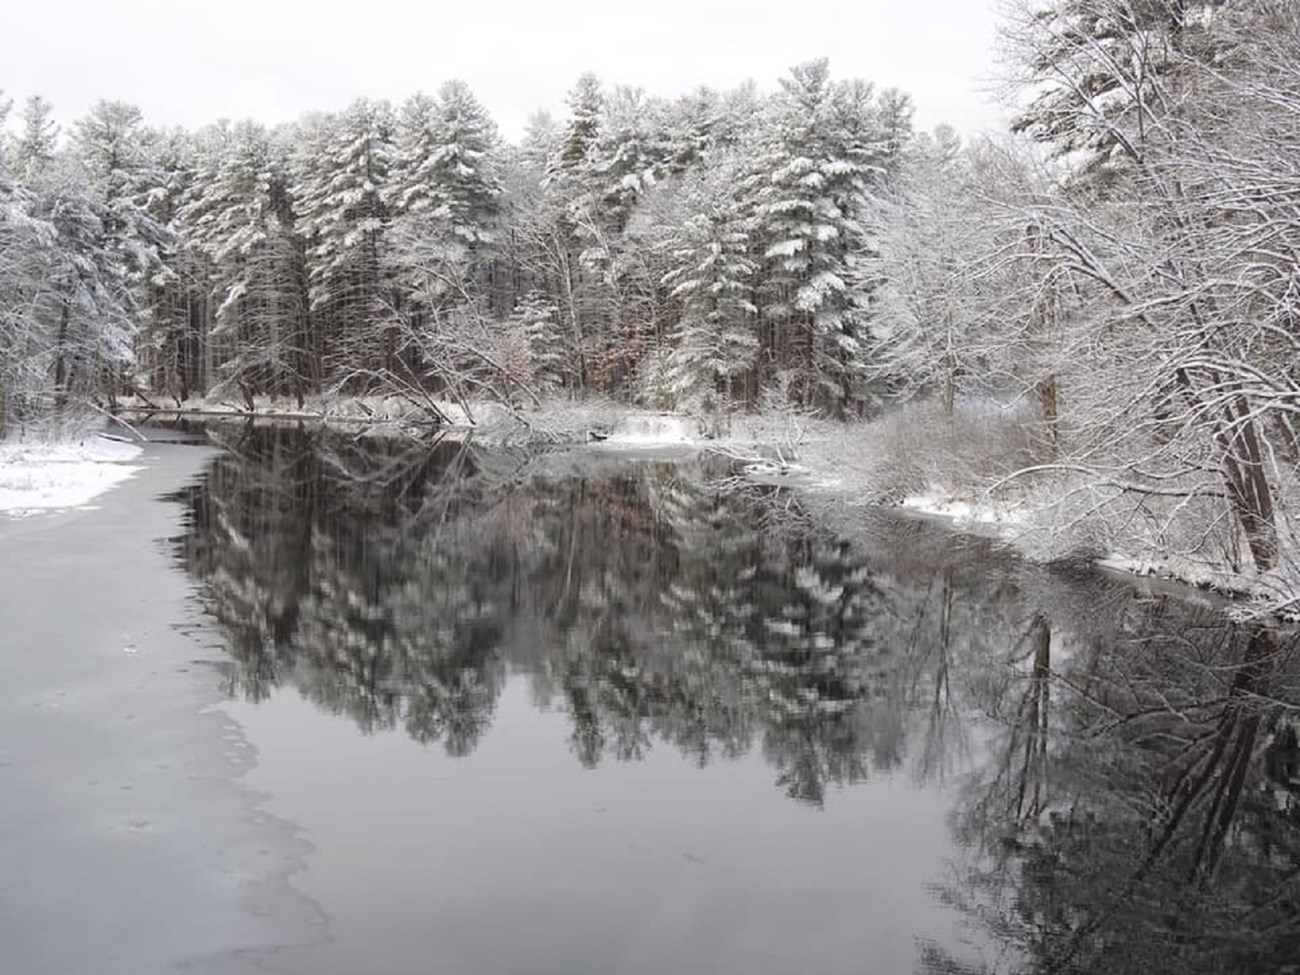 The Nashua River in the winter. Photo courtesy of Nashua River Watershed Association Facebook page.